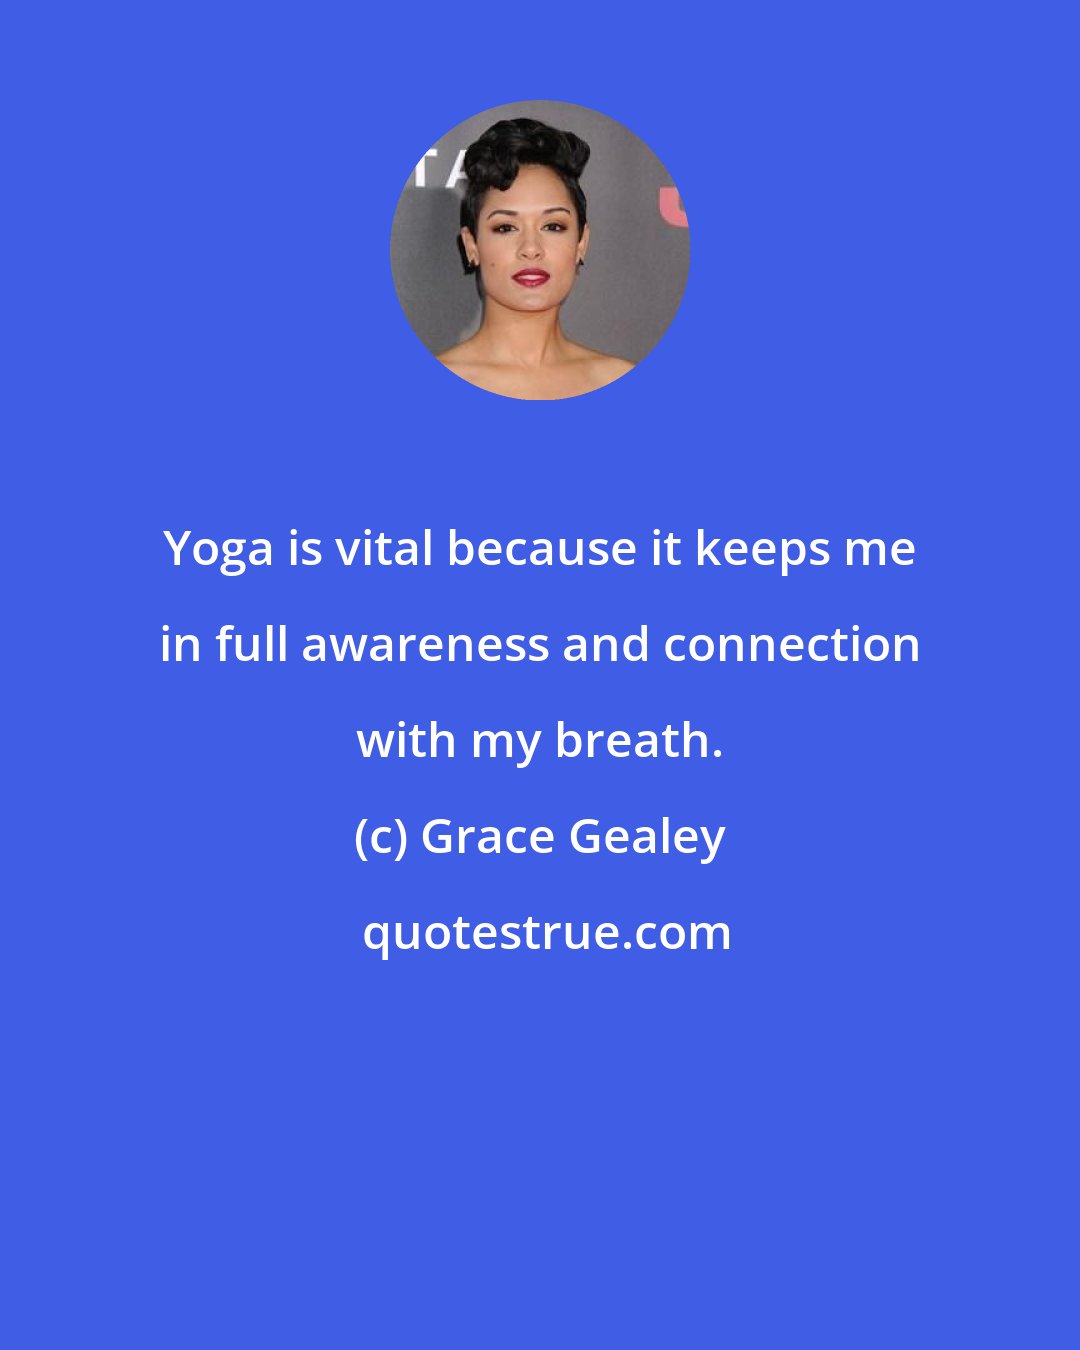 Grace Gealey: Yoga is vital because it keeps me in full awareness and connection with my breath.